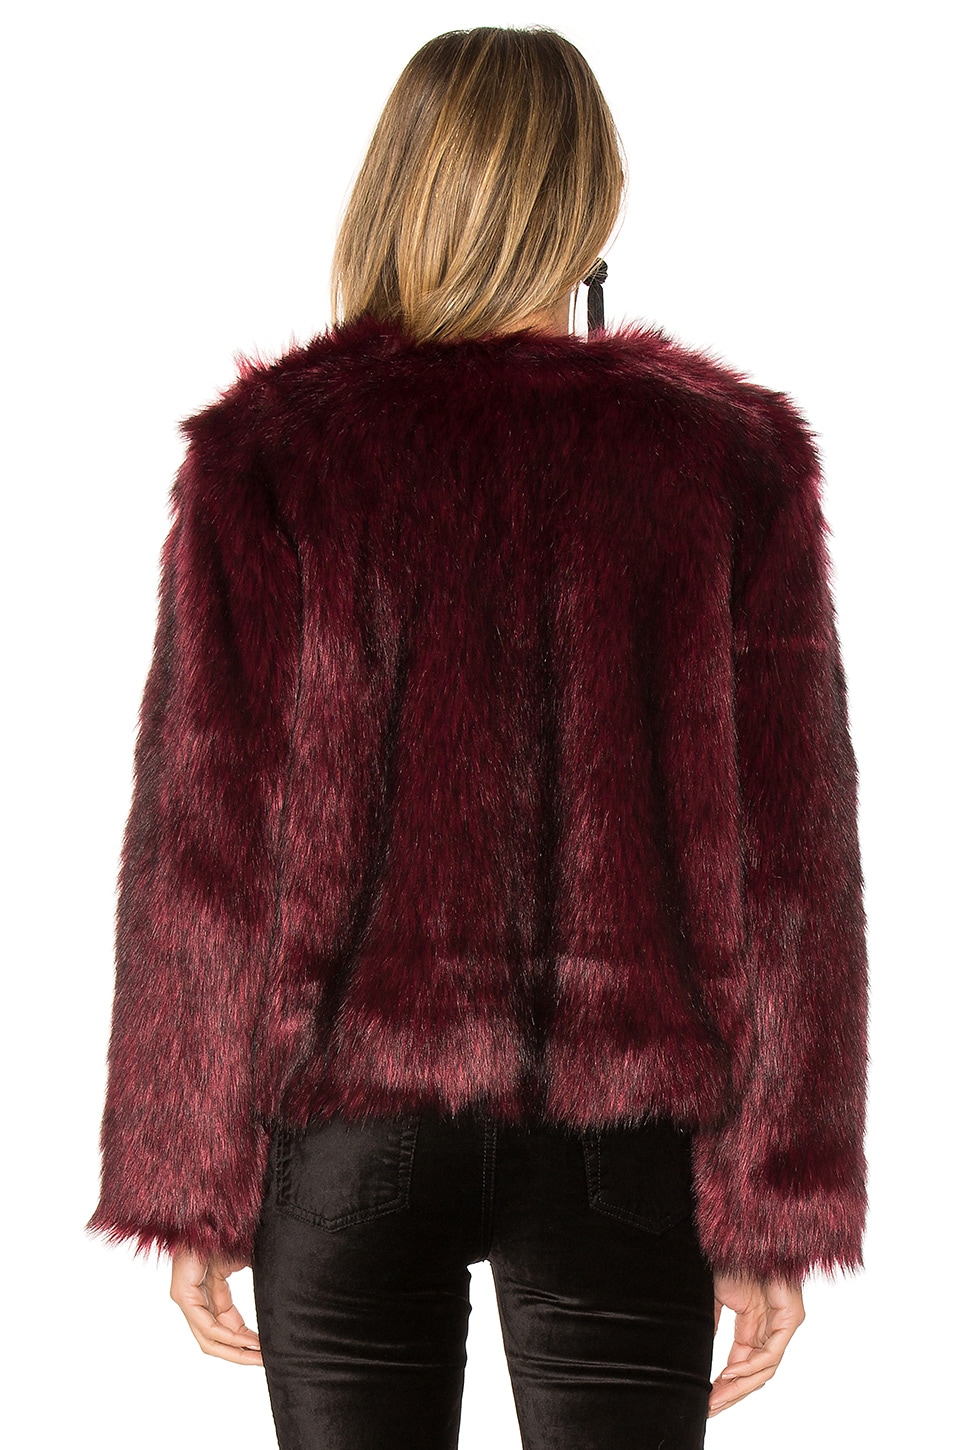 cupcakes and cashmere Snyder Faux Fur Jacket in Merlot | REVOLVE